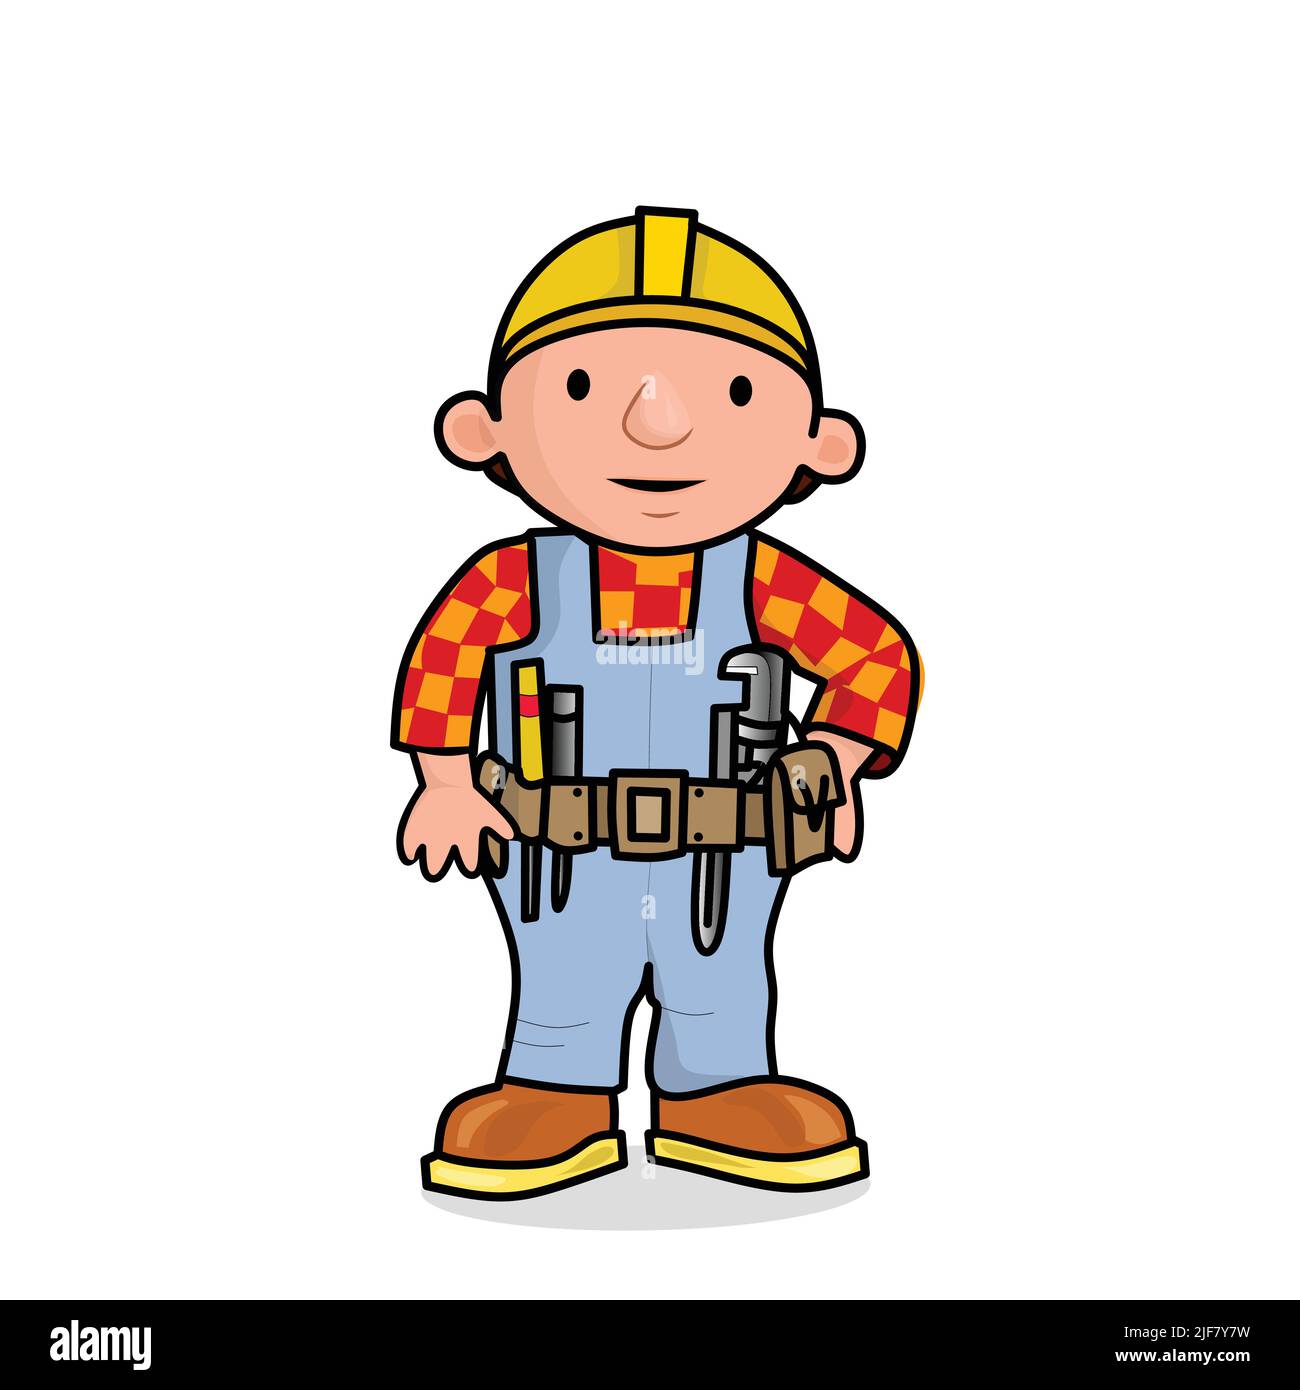 How to Draw a Builder for Kids